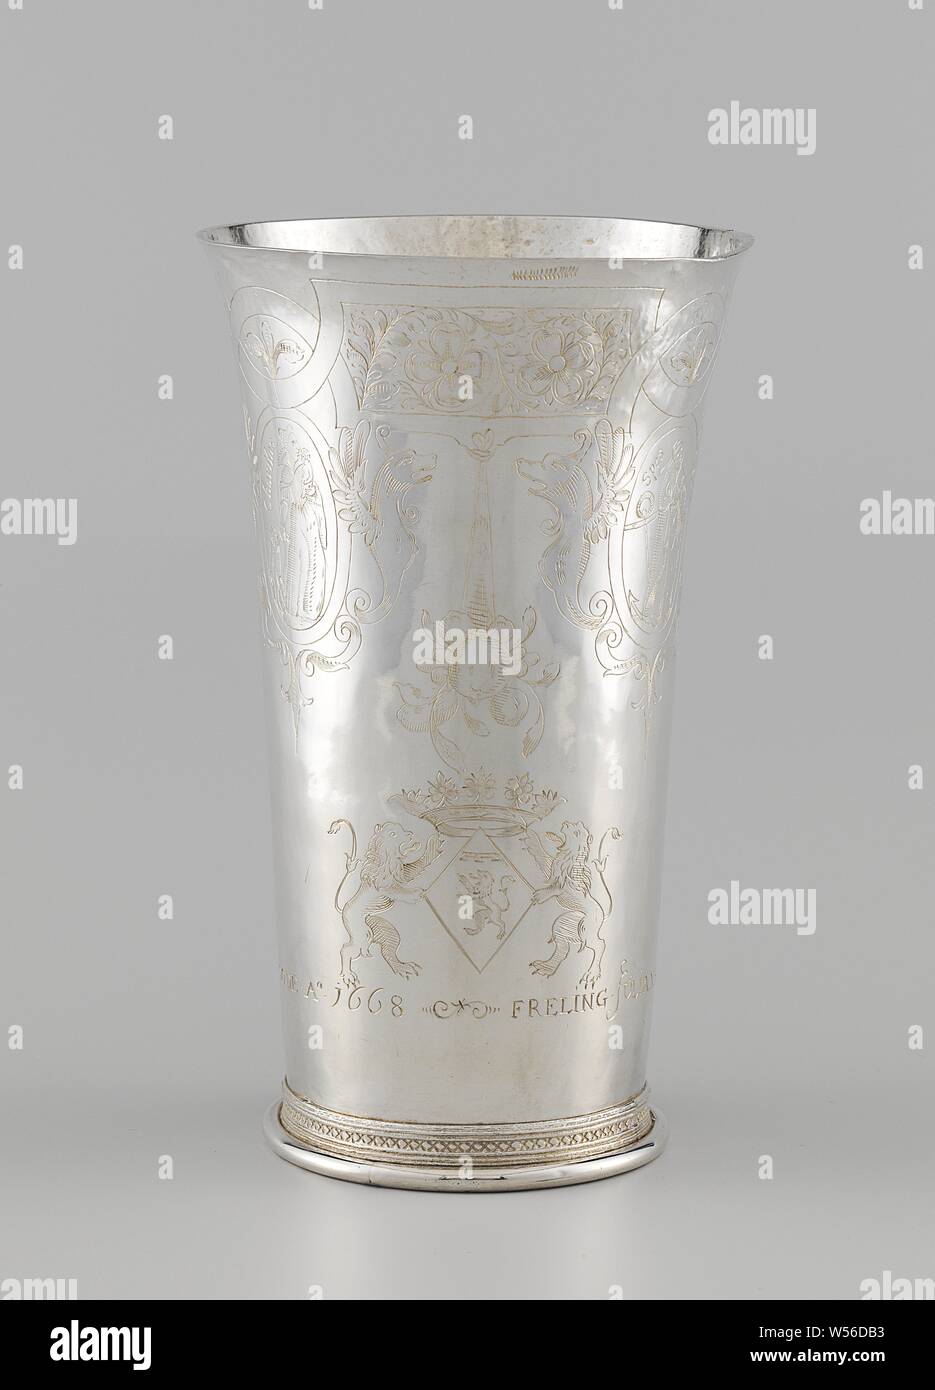 Communion Cup of Vianen, Supper Cup of Vianen, Cup of silver, broadening upwards and decorated with engraving. Decorated with three engraved medallions containing Charitas, Spes and Fides. With the inscription: Freling Juliana born countess of Holland Brederoode Ao 1668., anonymous, Gorinchem, c. 1625, silver (metal), h 20.0 cm × d 12.0 cm × w 380 Stock Photo